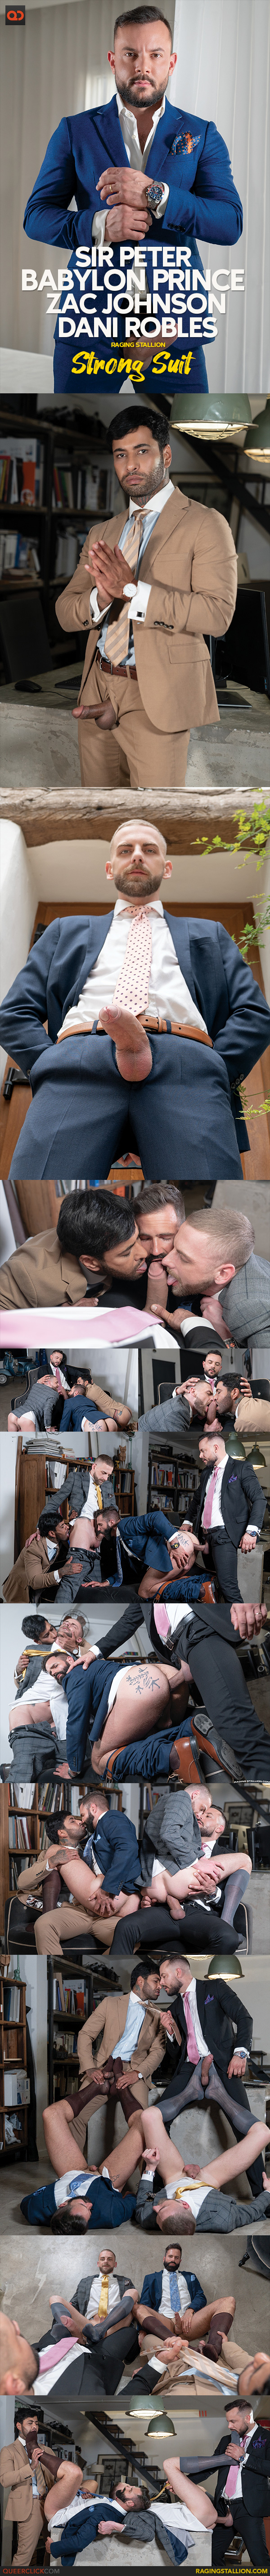 Raging Stallion: Dani Robles, Sir Peter, Zac Johnson and Babylon Prince - Strong Suit